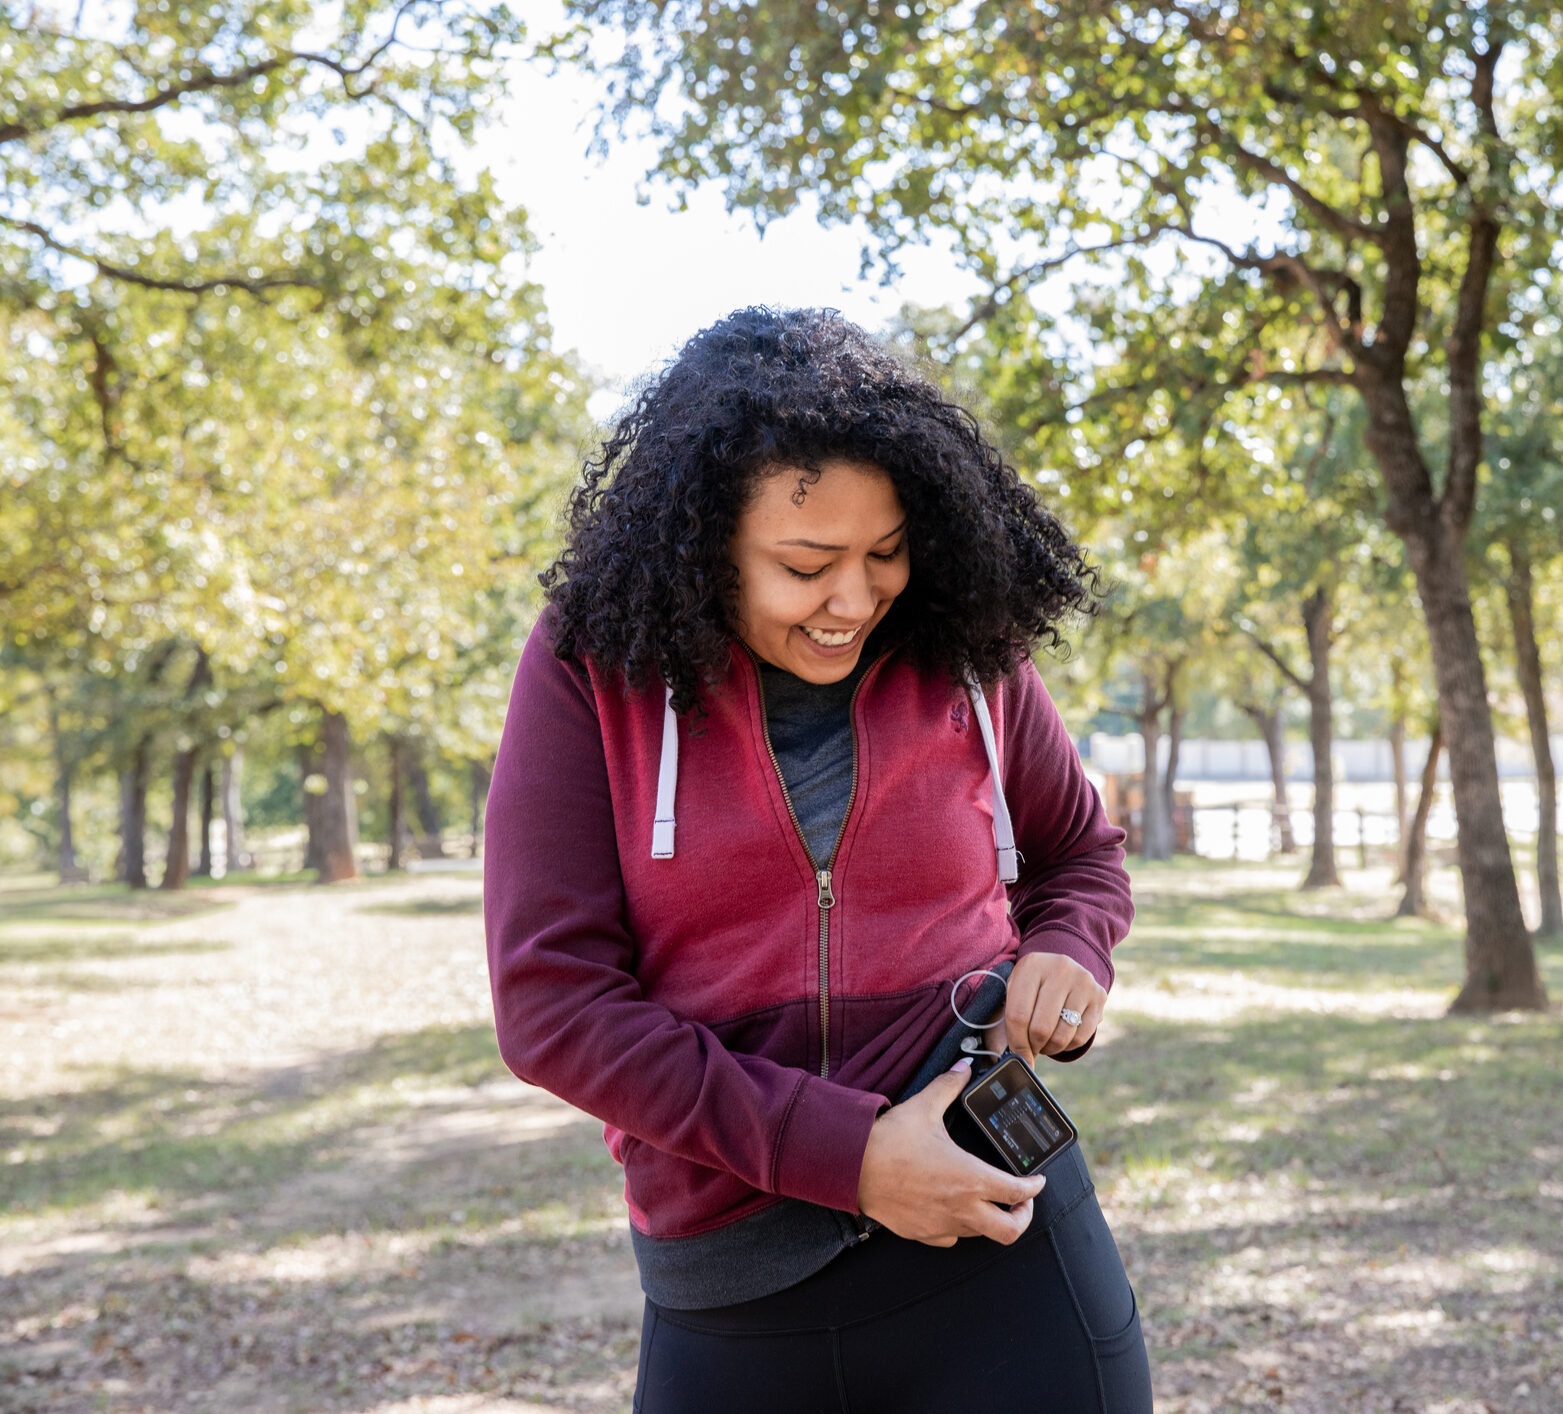 Young woman checks insulin pump and blood sugar monitor while hiking outdoors